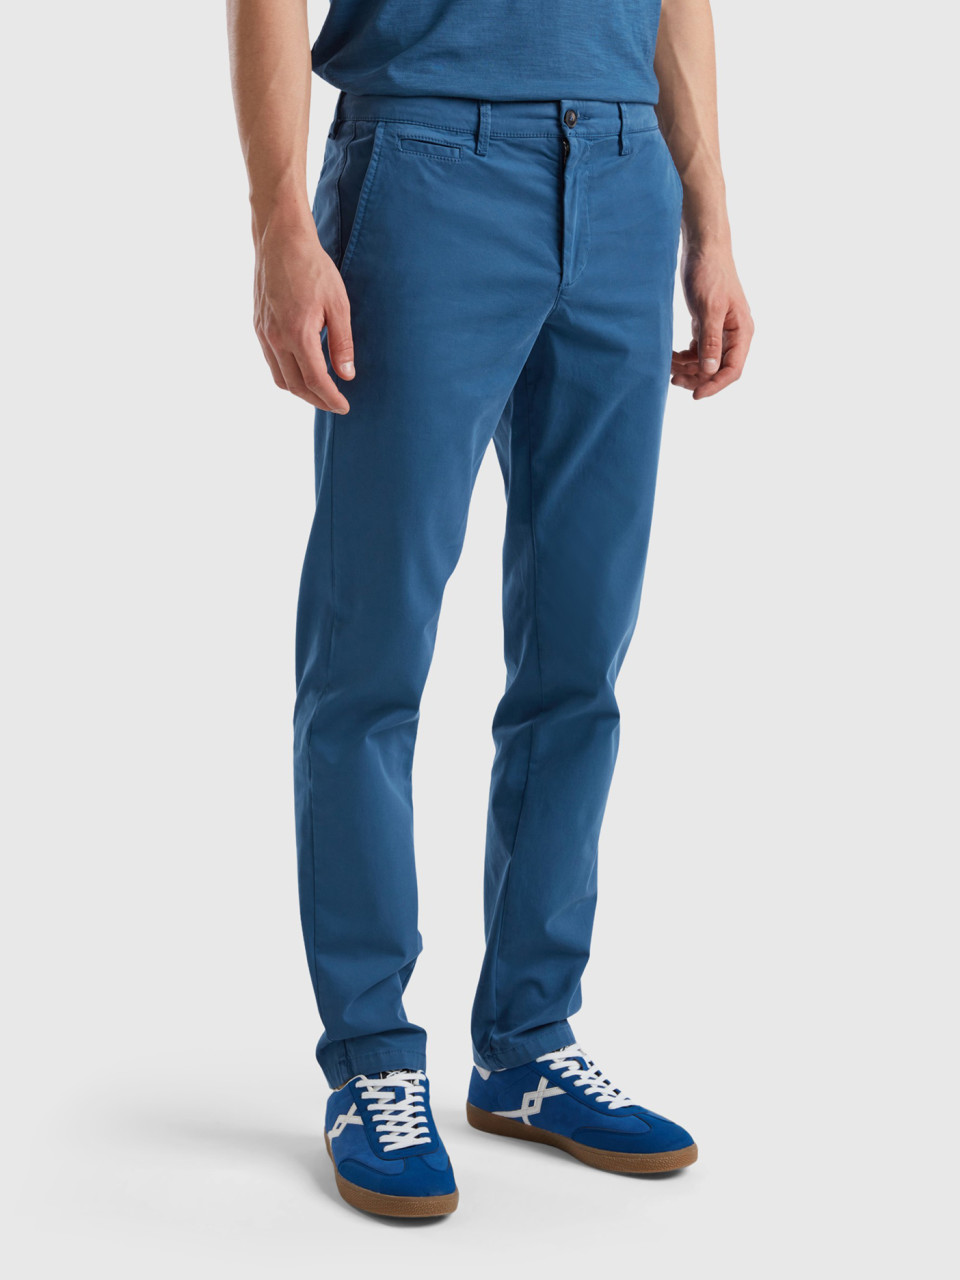 Benetton, Air Force Blue Slim Fit Chinos, Air Force Blue, Men